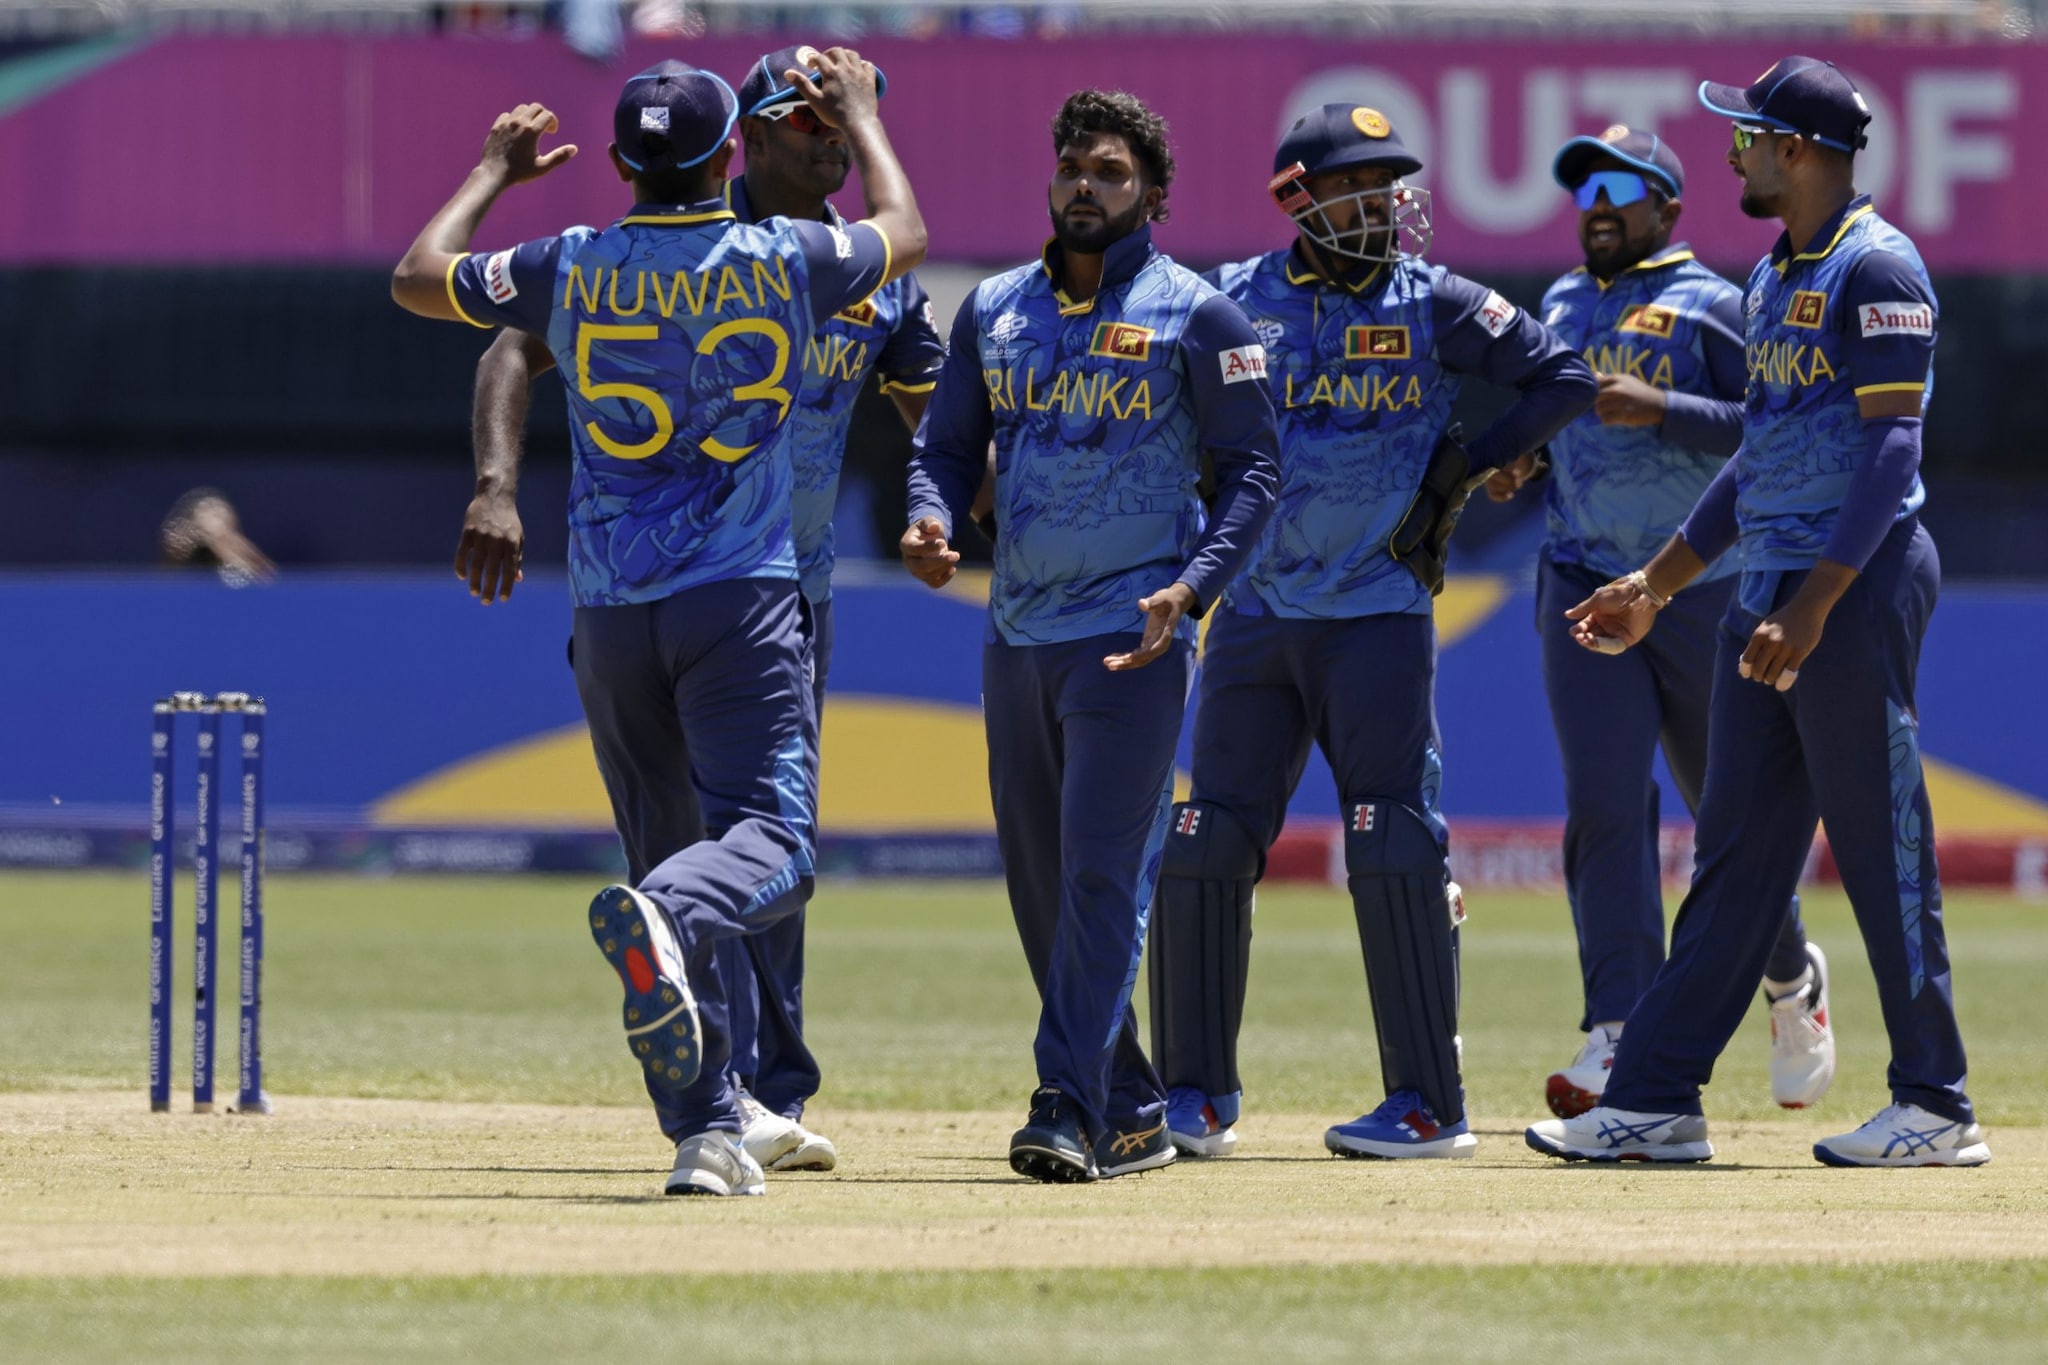 SA vs SL: Morale did not drop even after shameful defeat, captain said – there are still 3 matches left…